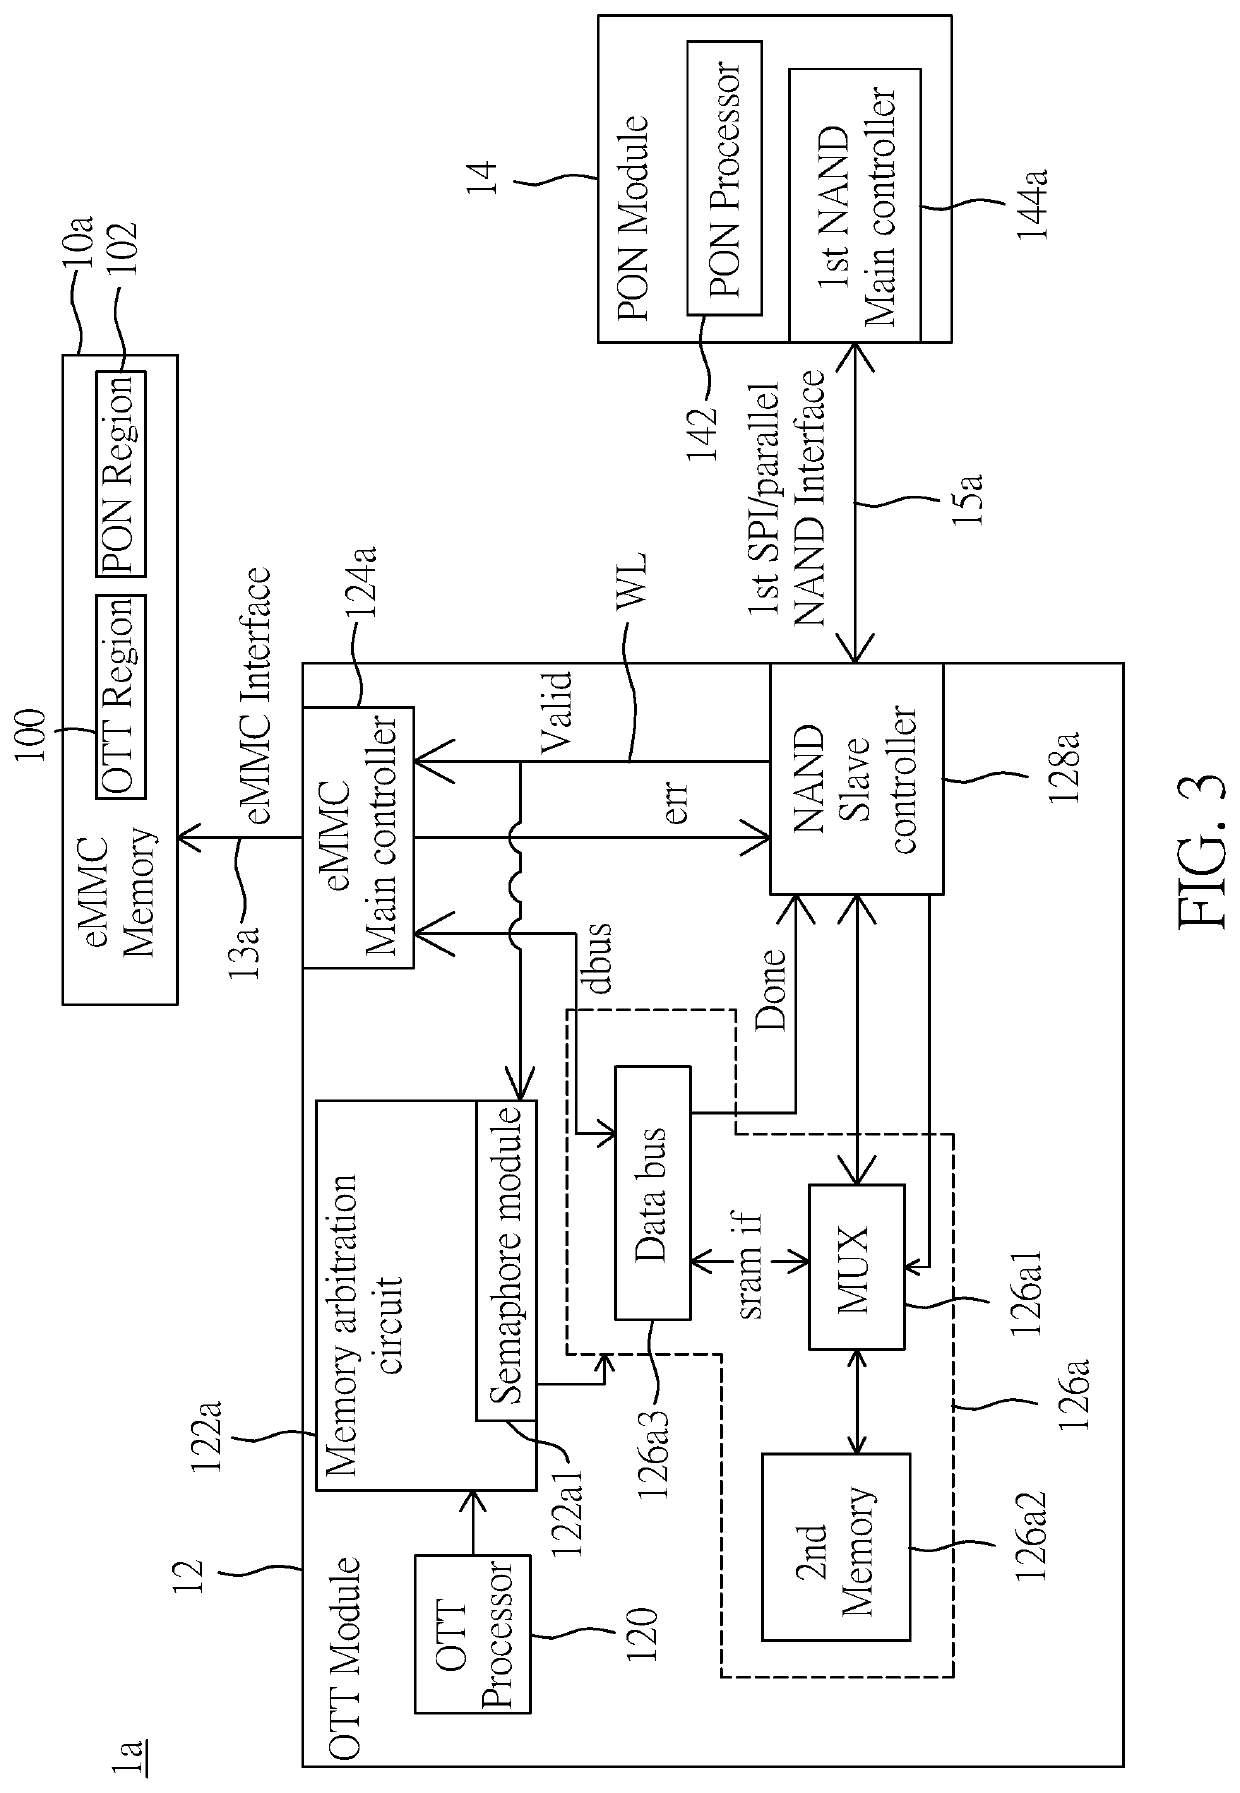 Memory sharing dual-mode network communication device